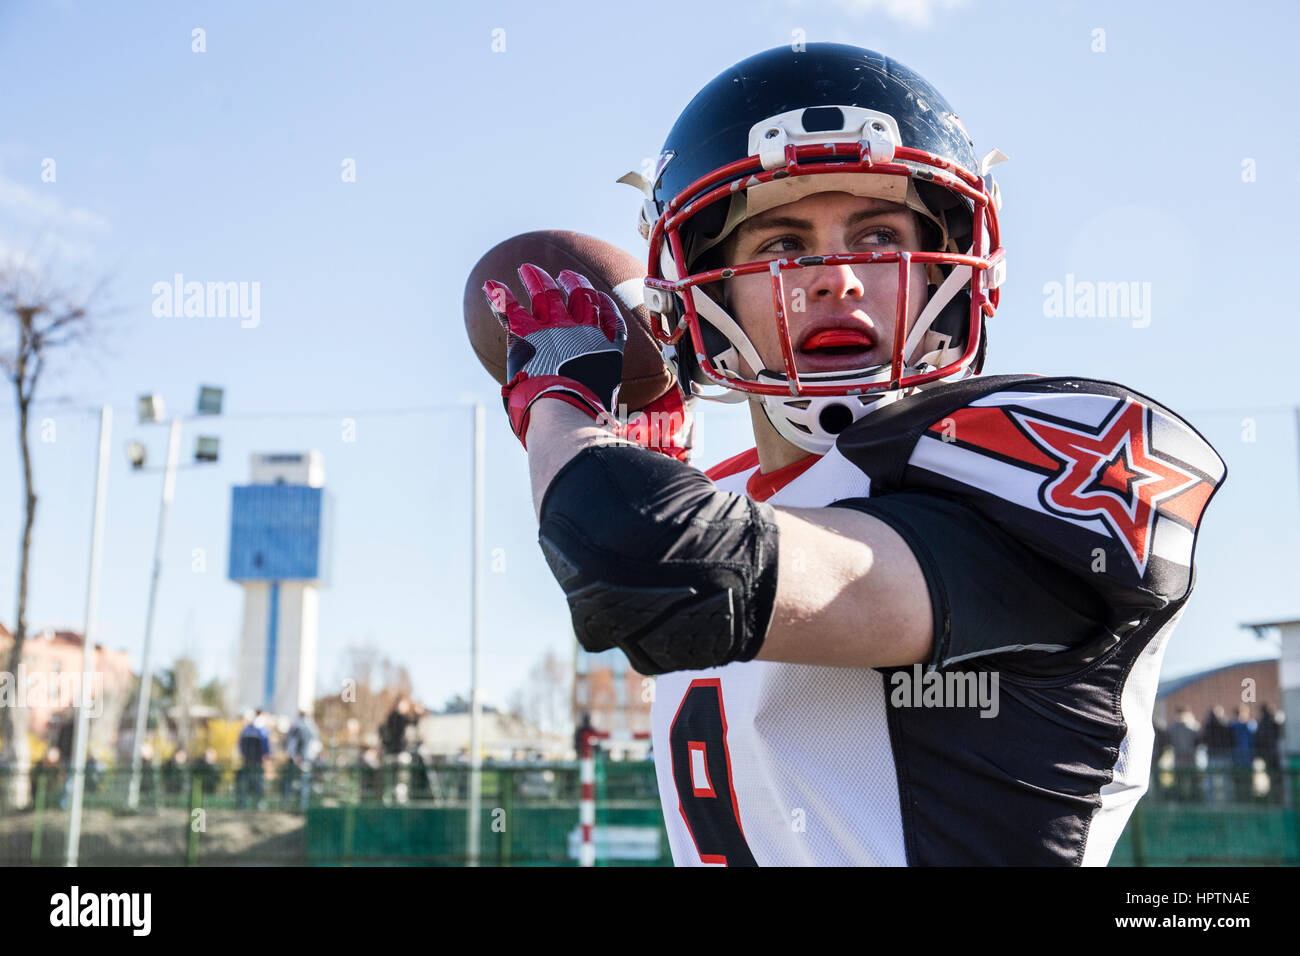 American football player throwing the ball during a match Stock Photo